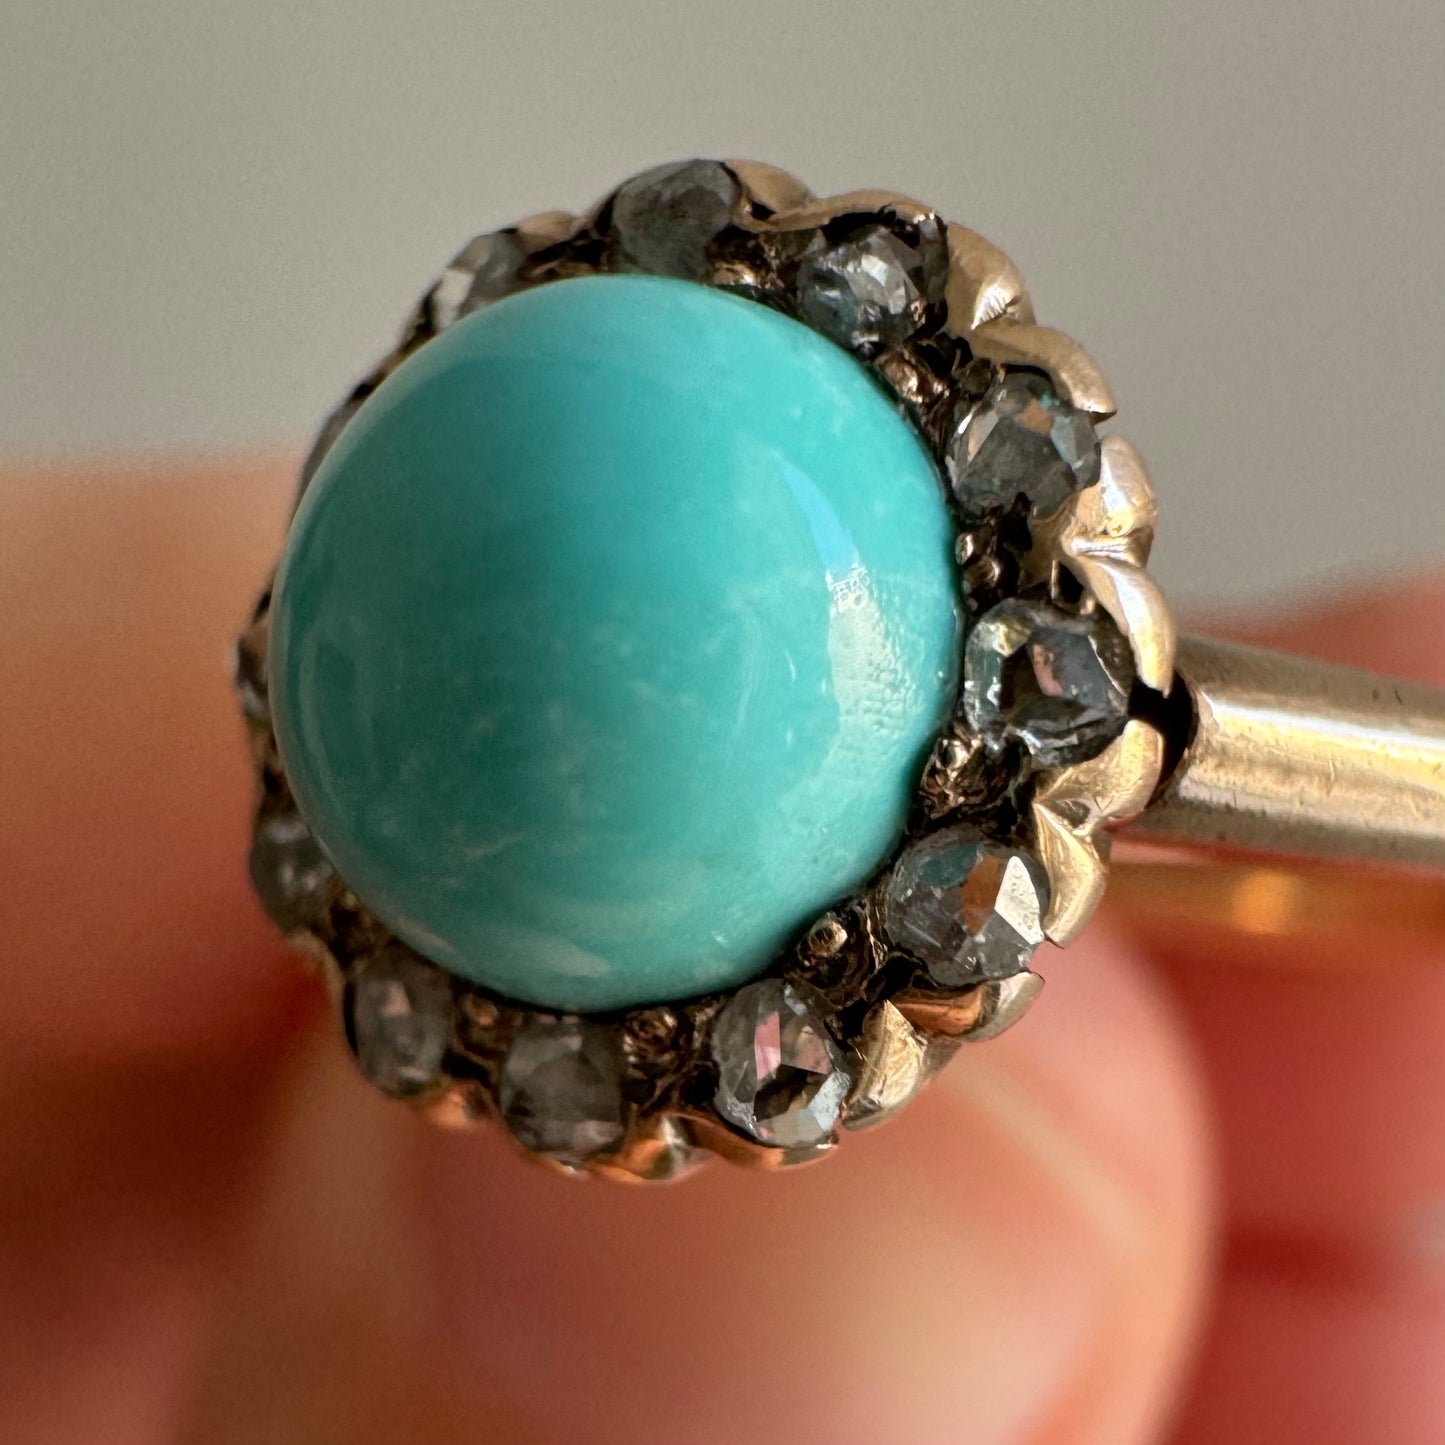 re-worked A N T I Q U E // turquoise daisy halo / 10k victorian gold with rose cut grey diamonds and turquoise / size 6